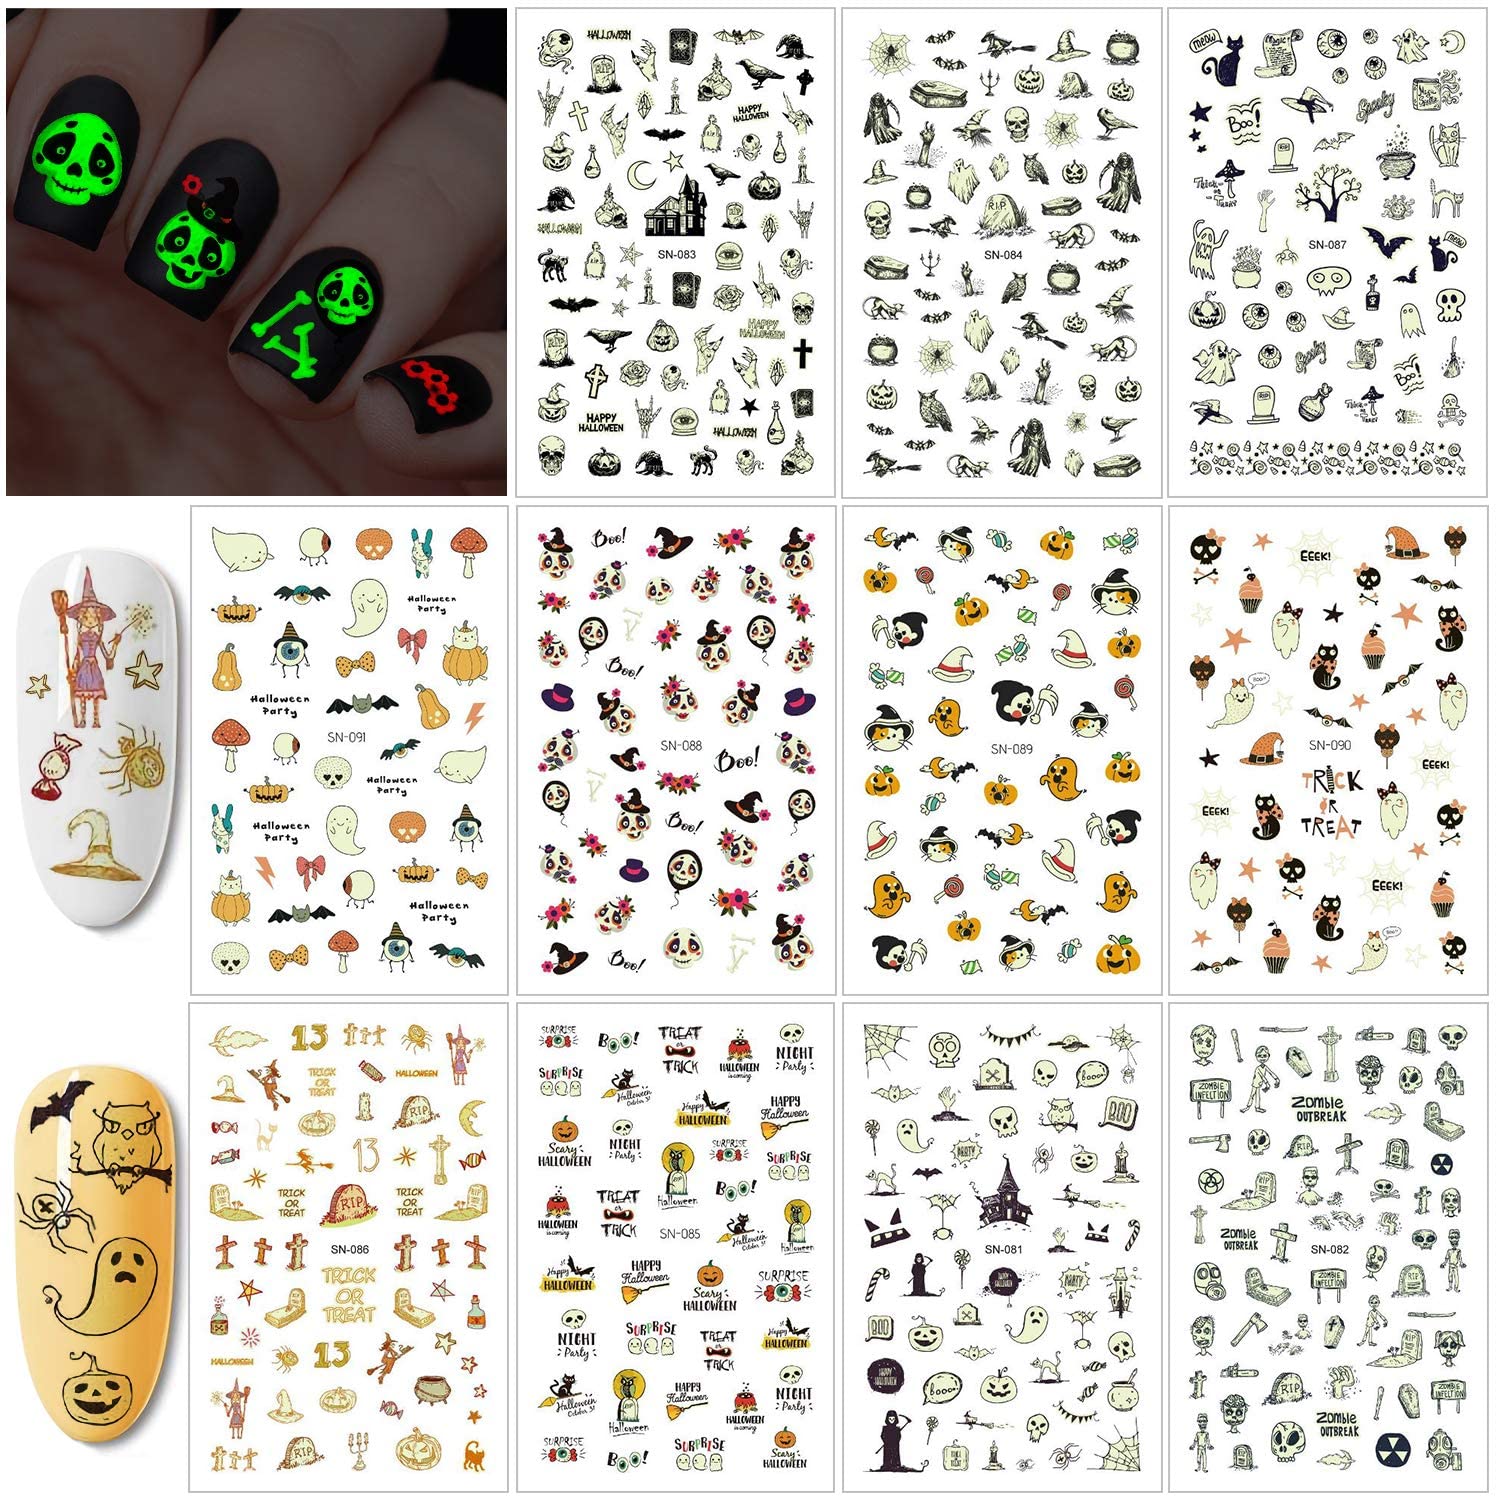 Glow in The Dark Halloween Nail Sticker Peel ja Halloween Self-Adhesive Nail Decals, Pumpkin Monster Nail Art for Kids Halloween Party Supplies Trick tai Treat Party Bag Fillers